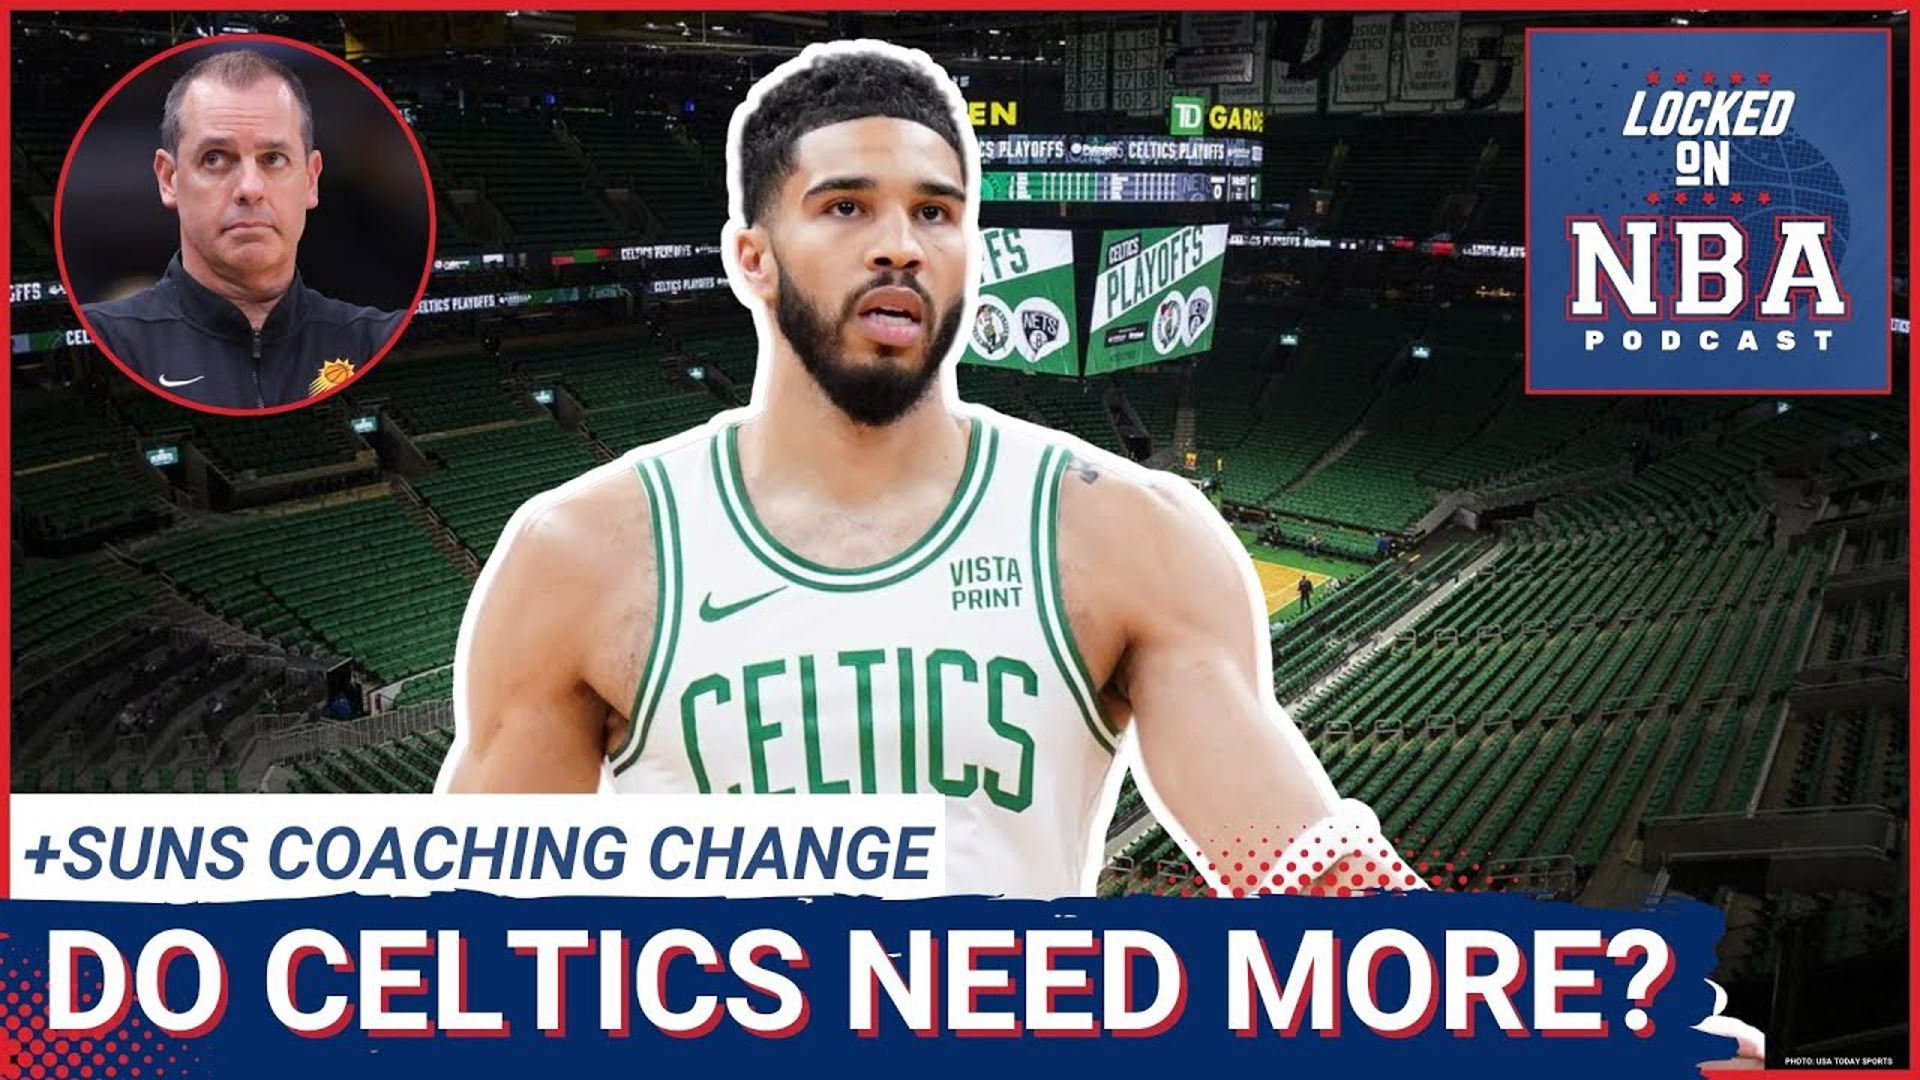 Do the Boston Celtics need more from Jayson Tatum? Plus, the Mavericks even up the series against the Thunder and the Phoenix Suns are making a coaching change.